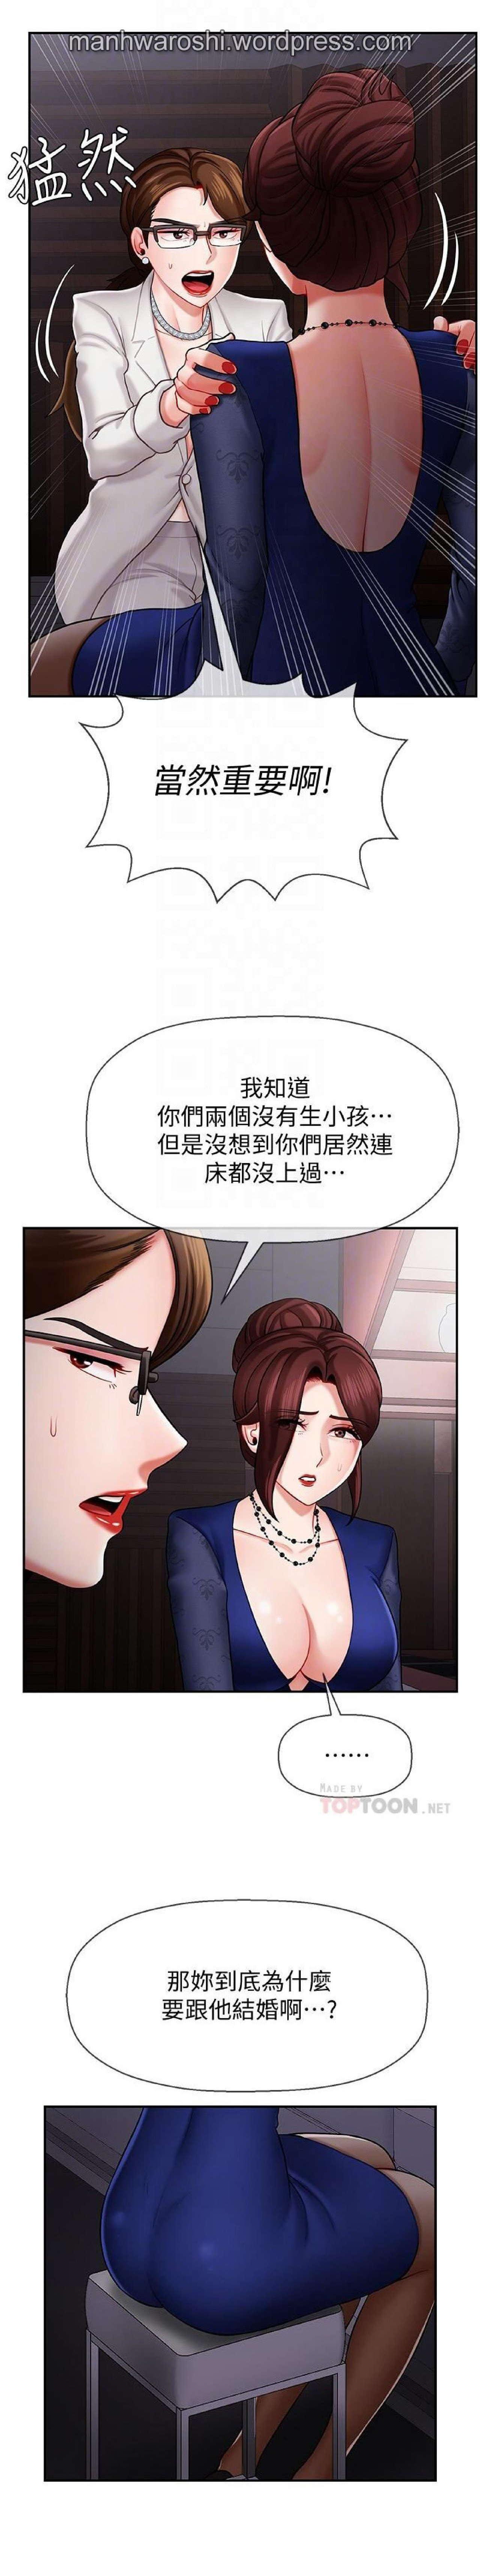 Anal Gape 坏老师 | PHYSICAL CLASSROOM 6 Party - Page 14